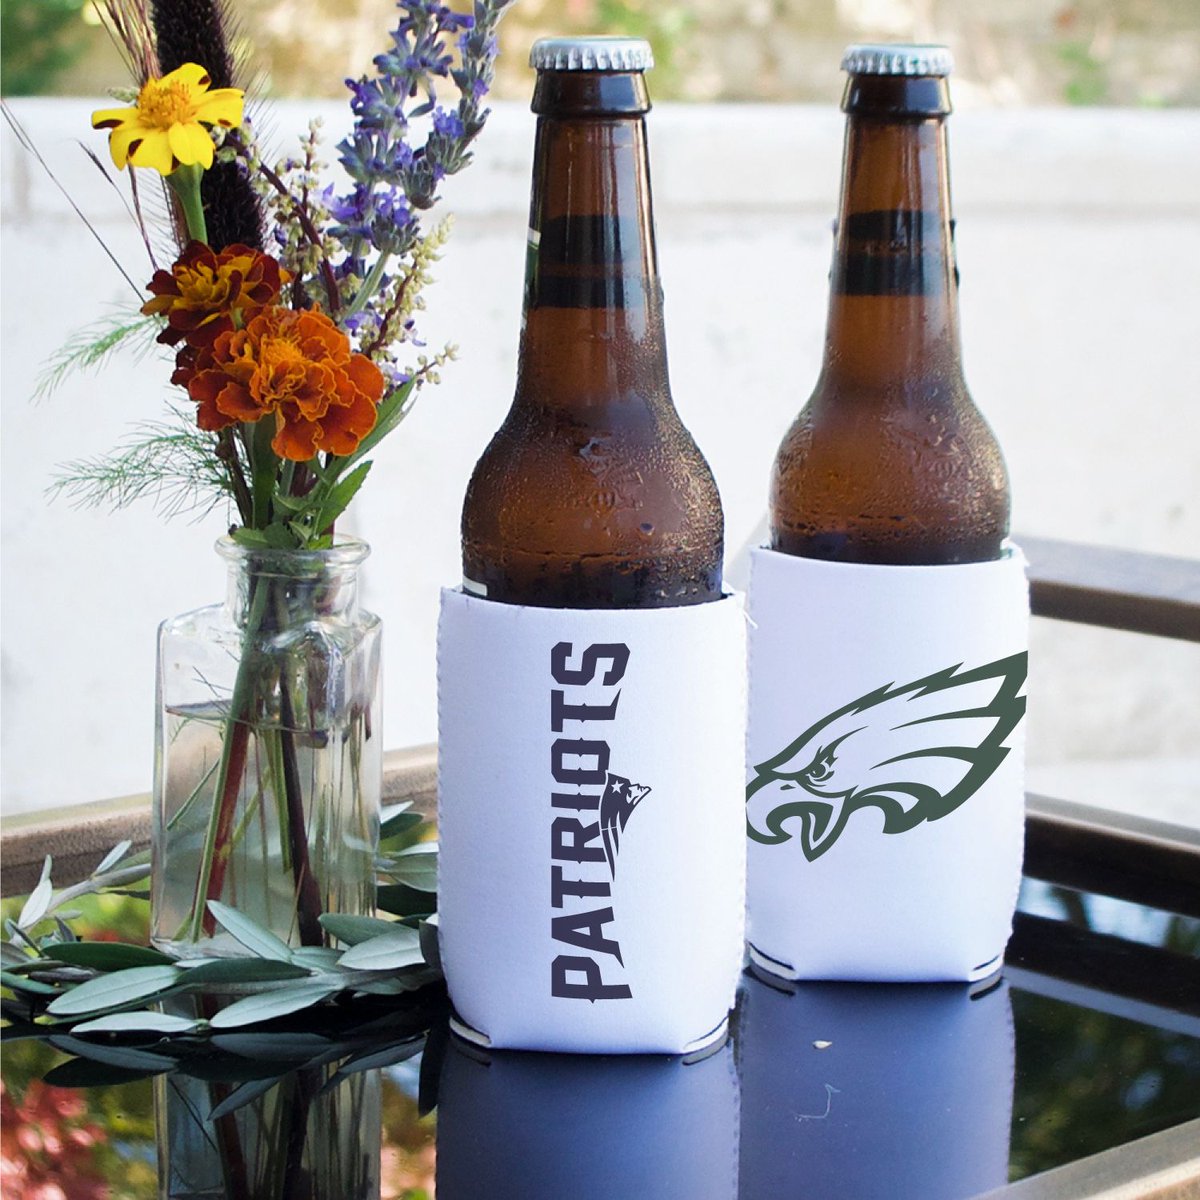 Happy Super Bowl Sunday!!🏈 Here in Texas, we're trying to decide who is the lesser of two evils 😏  Who are y'all rooting for?! 
-
*these logos are not ours - just having a little fun with our football spirit!*
-
#superbowl #eagles #patriots #superbowlsunday #customcancoolers